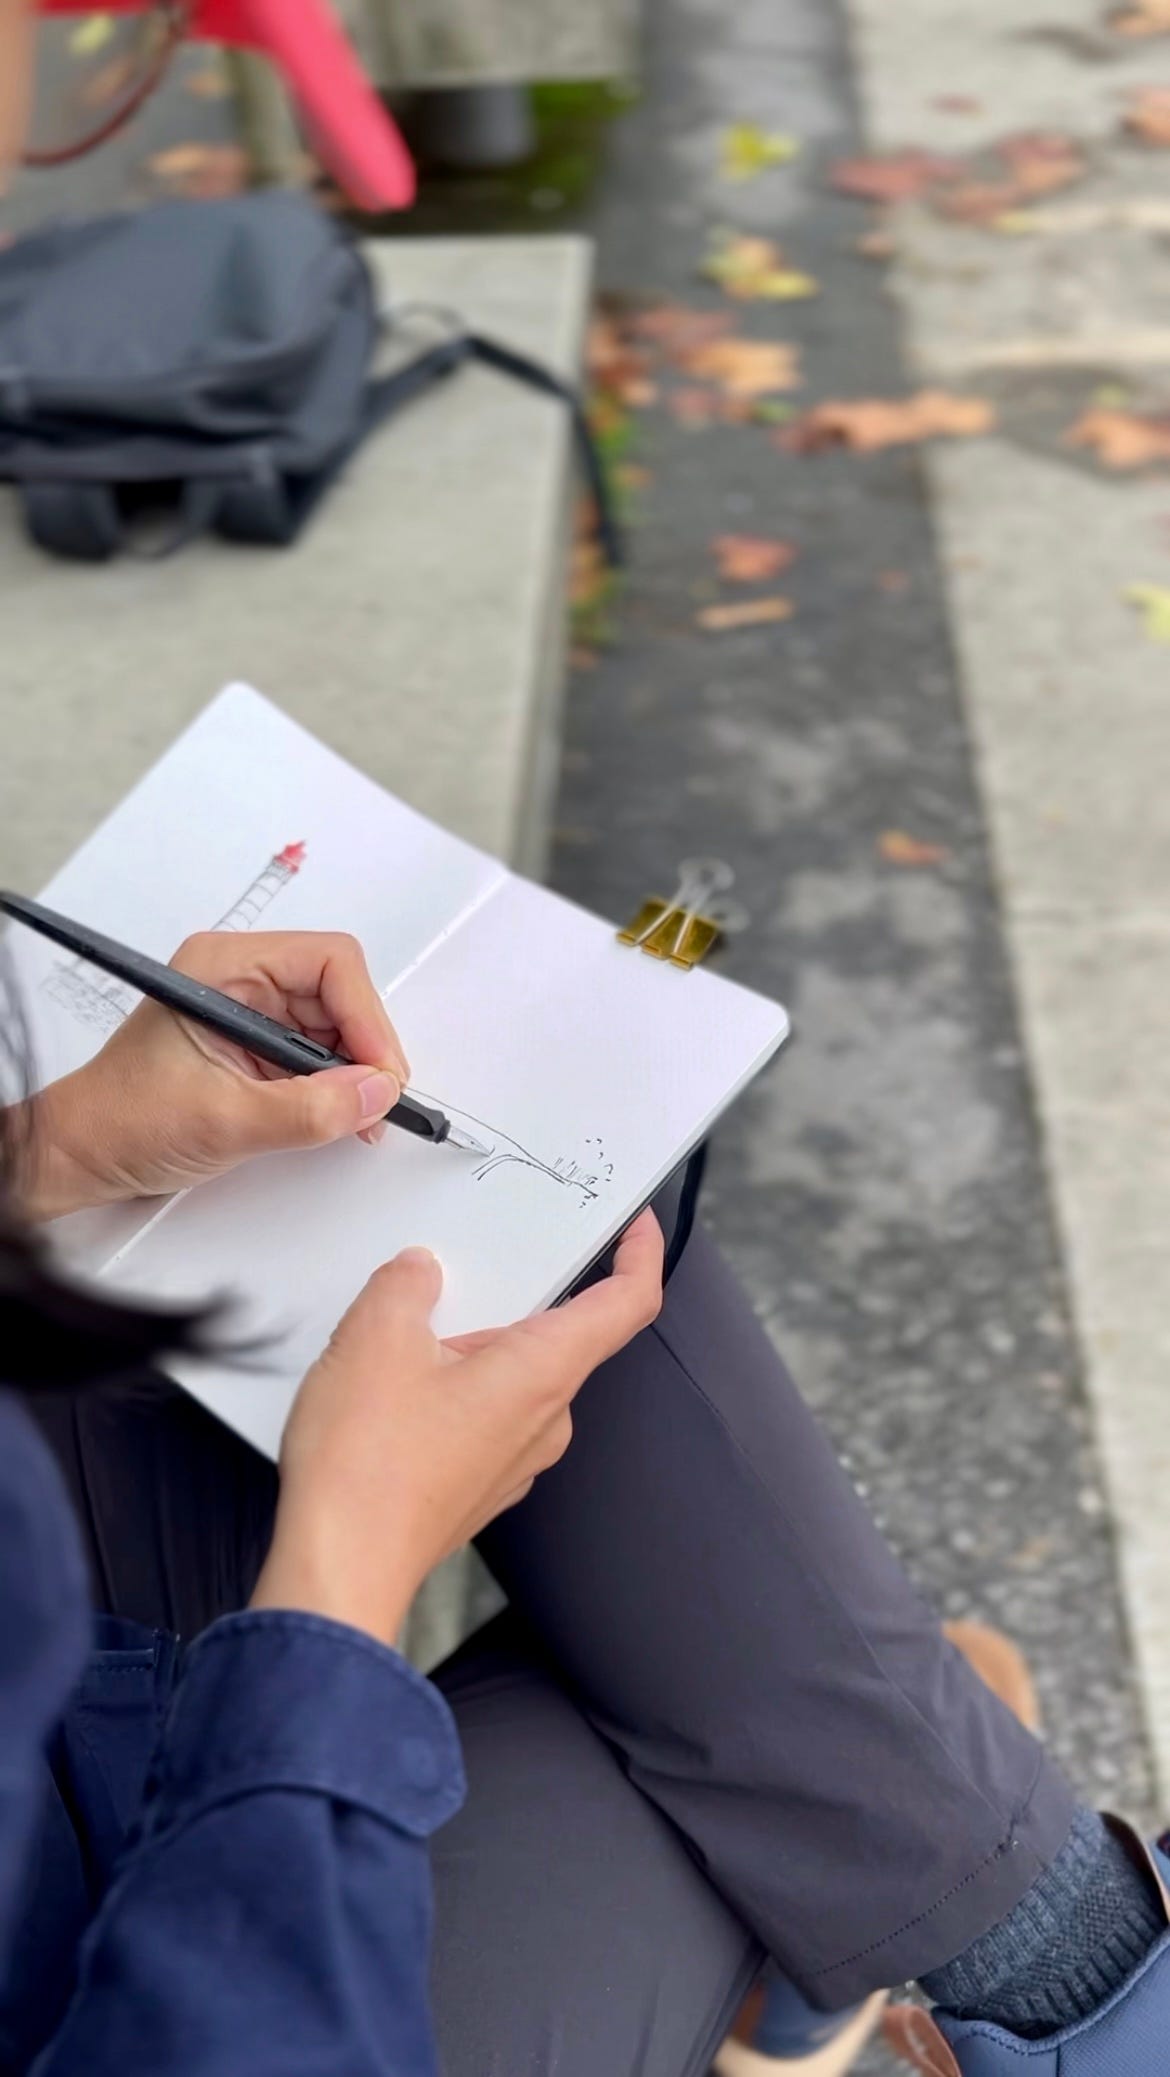 image: close up photo of me with my calligraphy pen drawing on my sketchbook outdoors